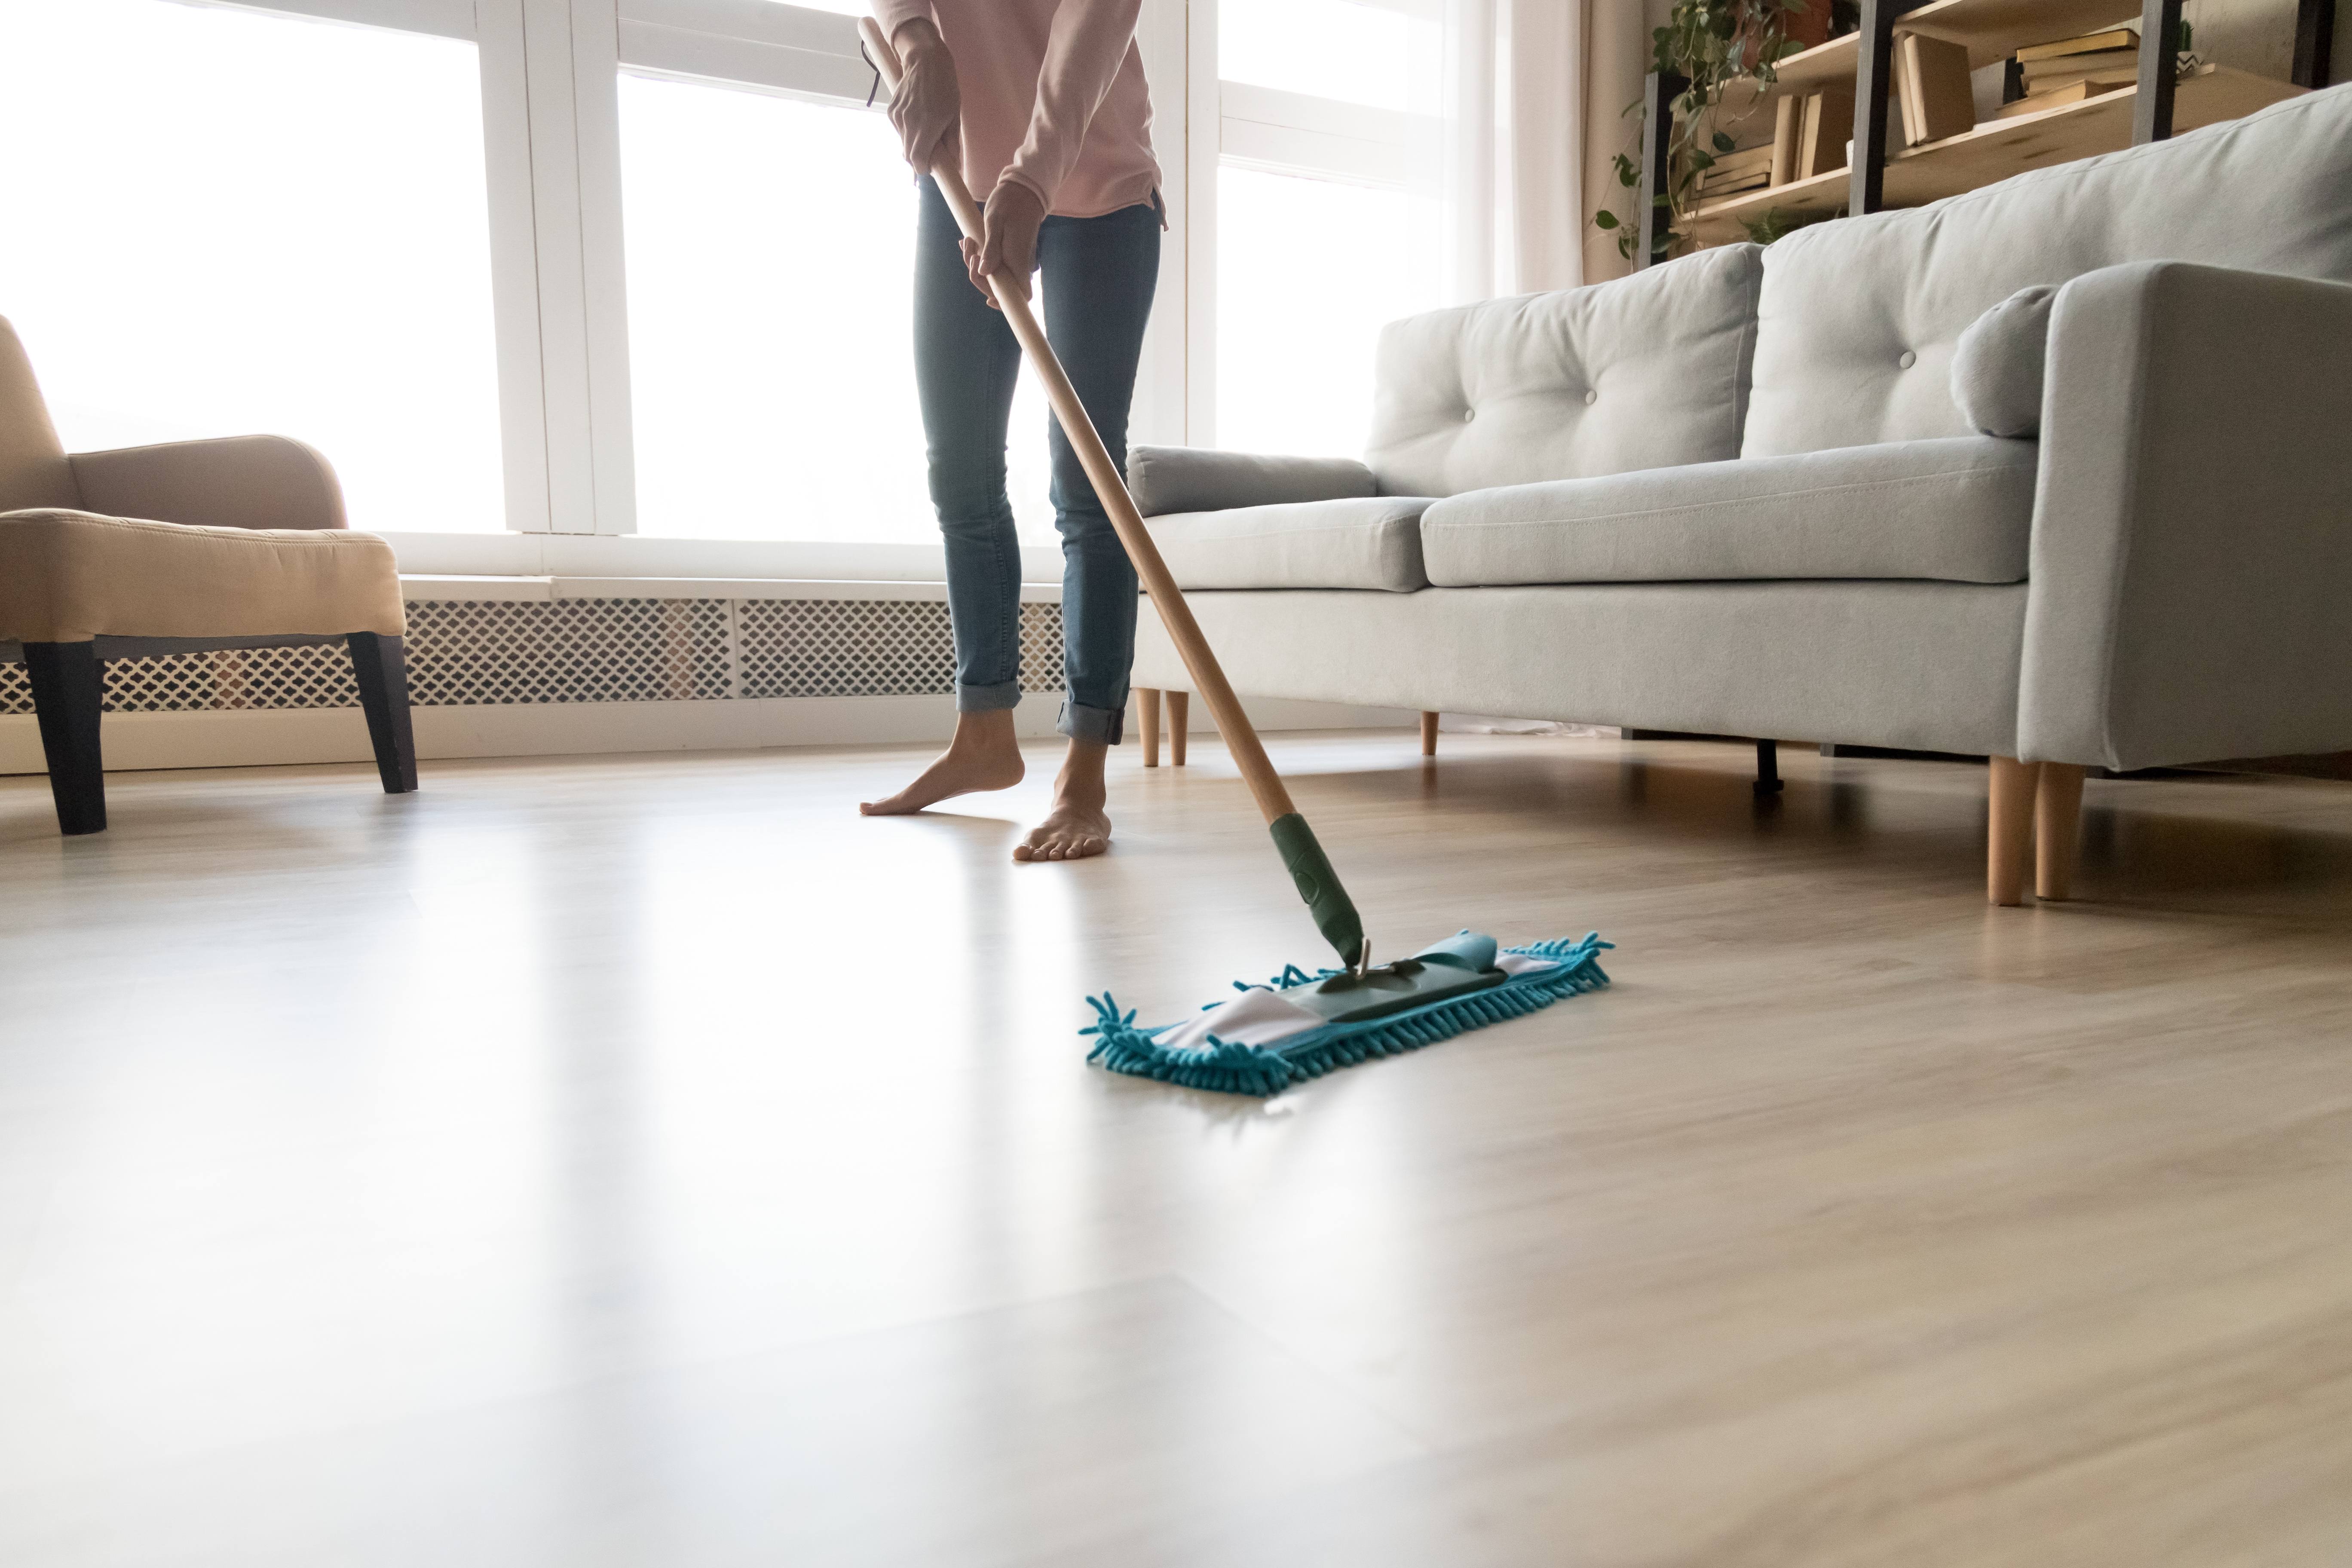 Cleaning a floor – from vacuuming to dry mopping, using vinegar and more